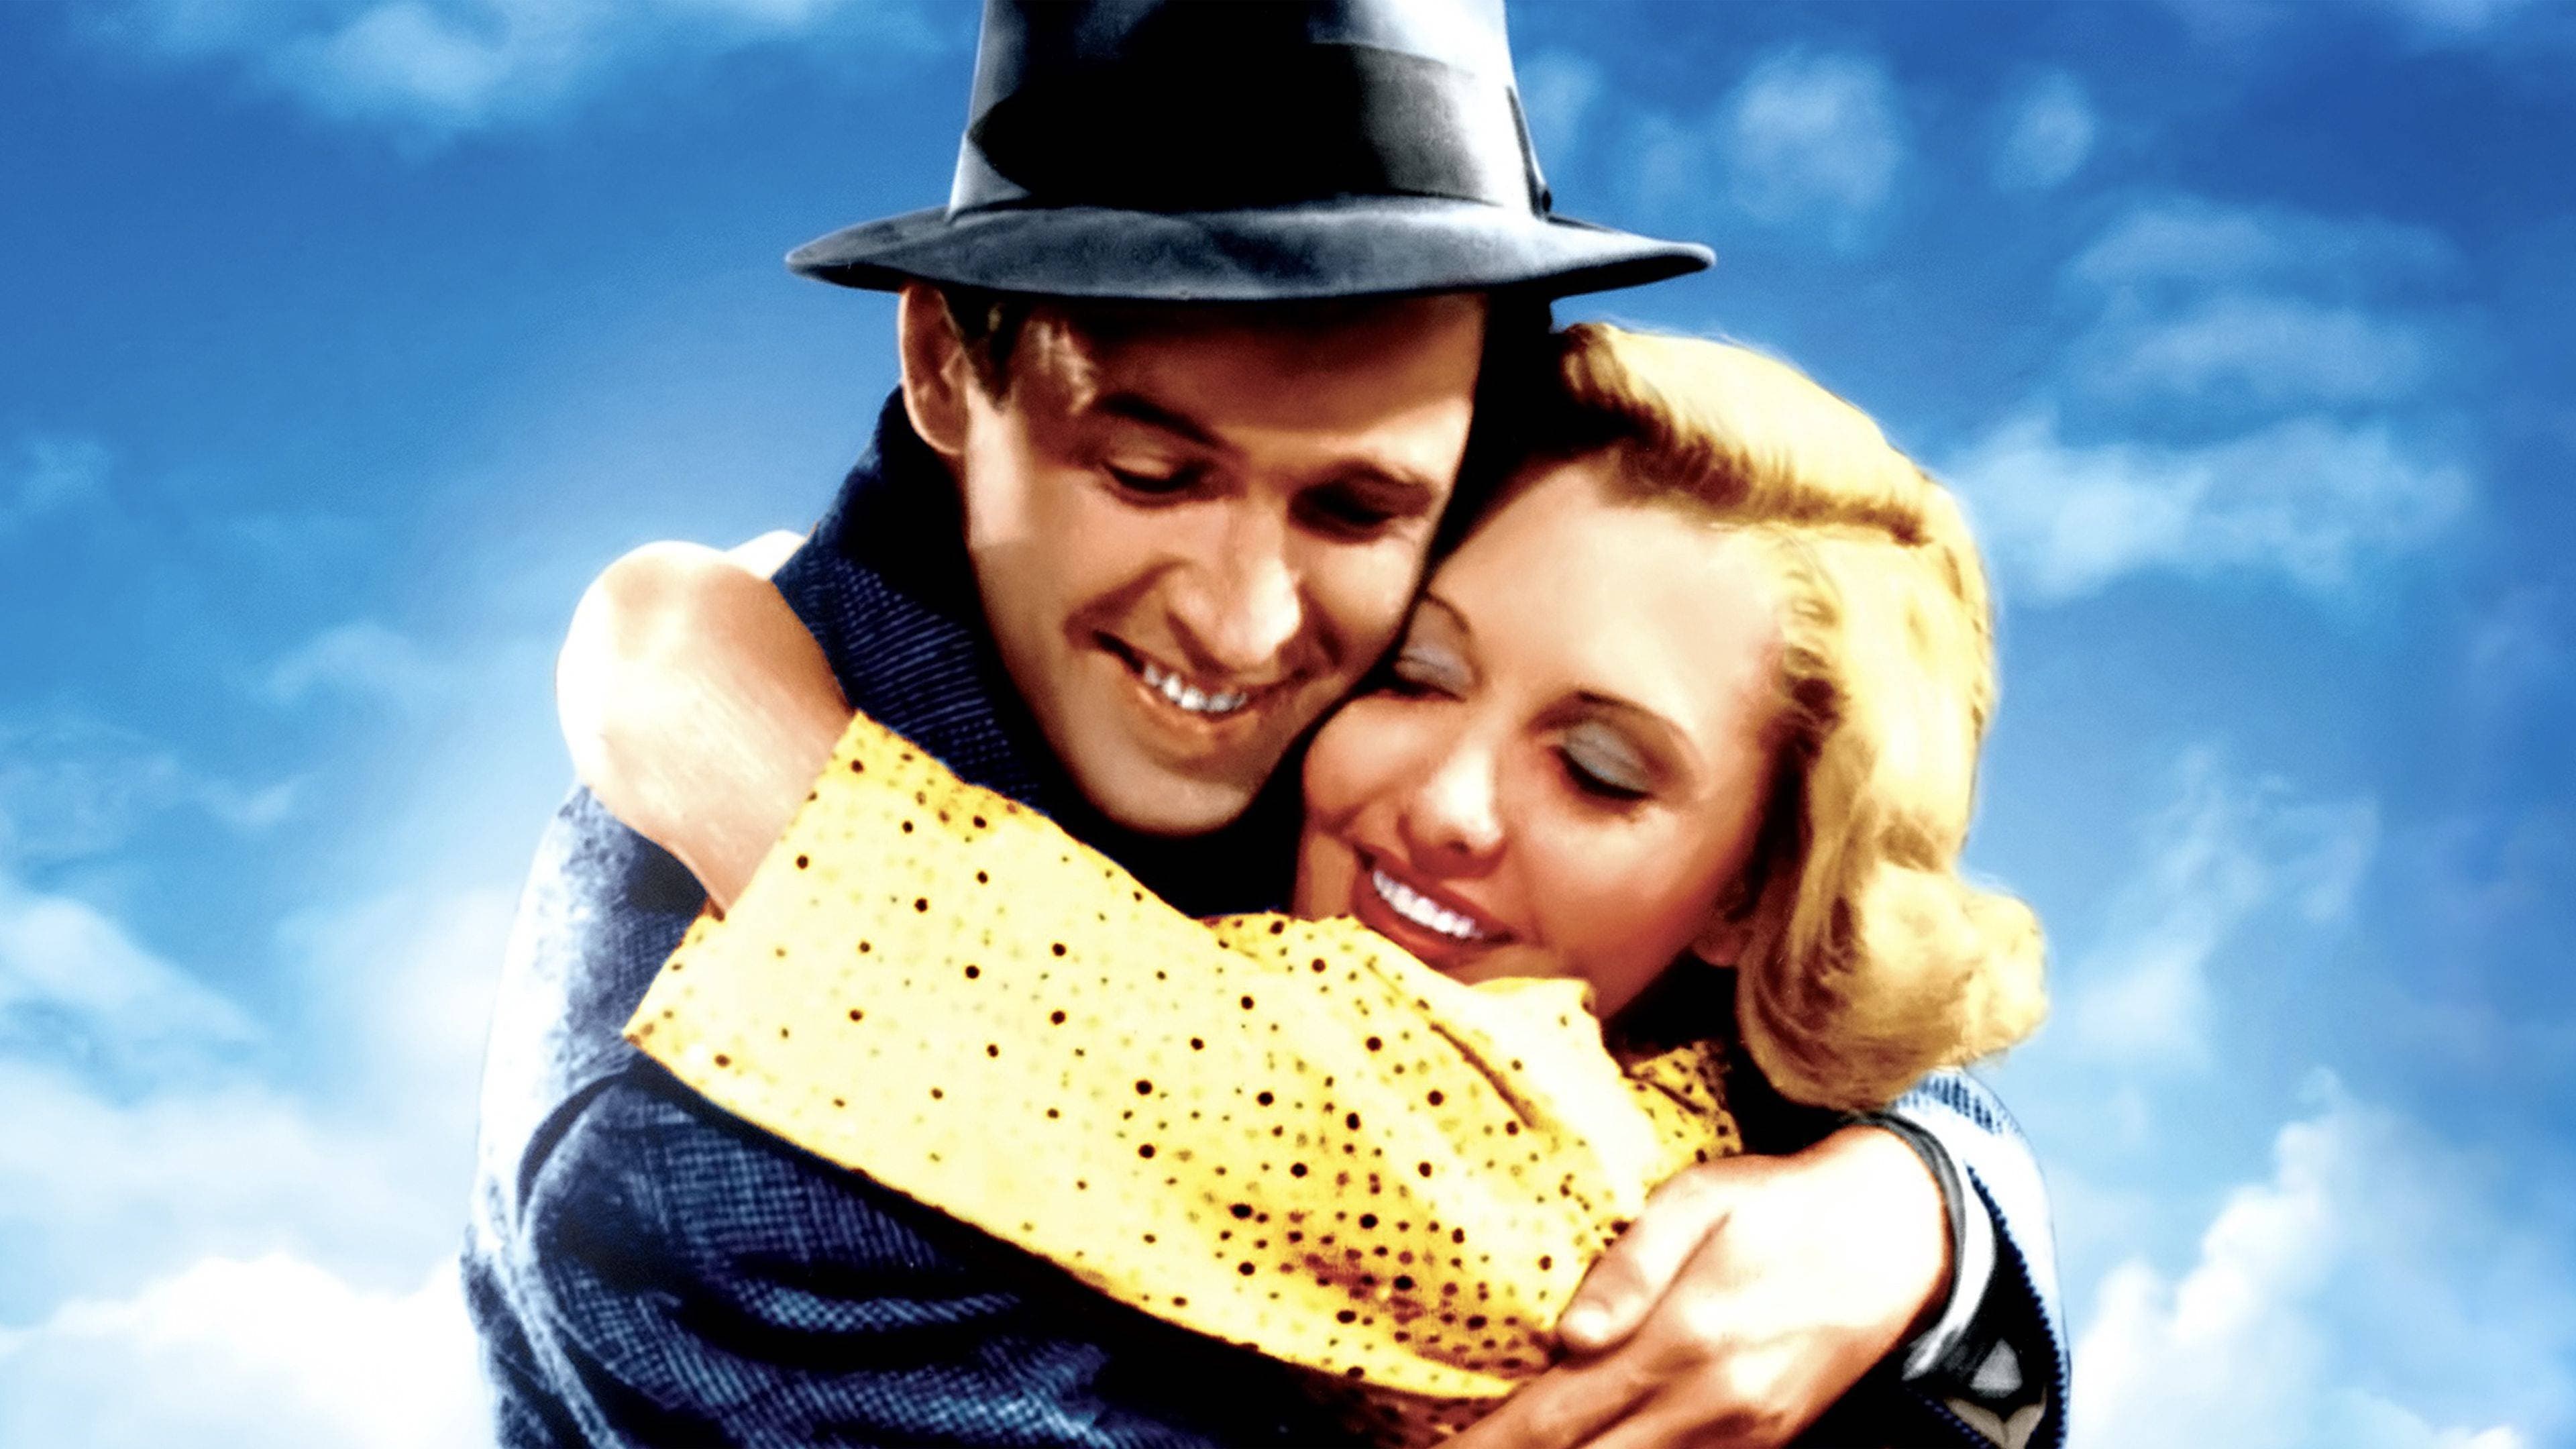 You Can’t Take It with You 1938 123movies